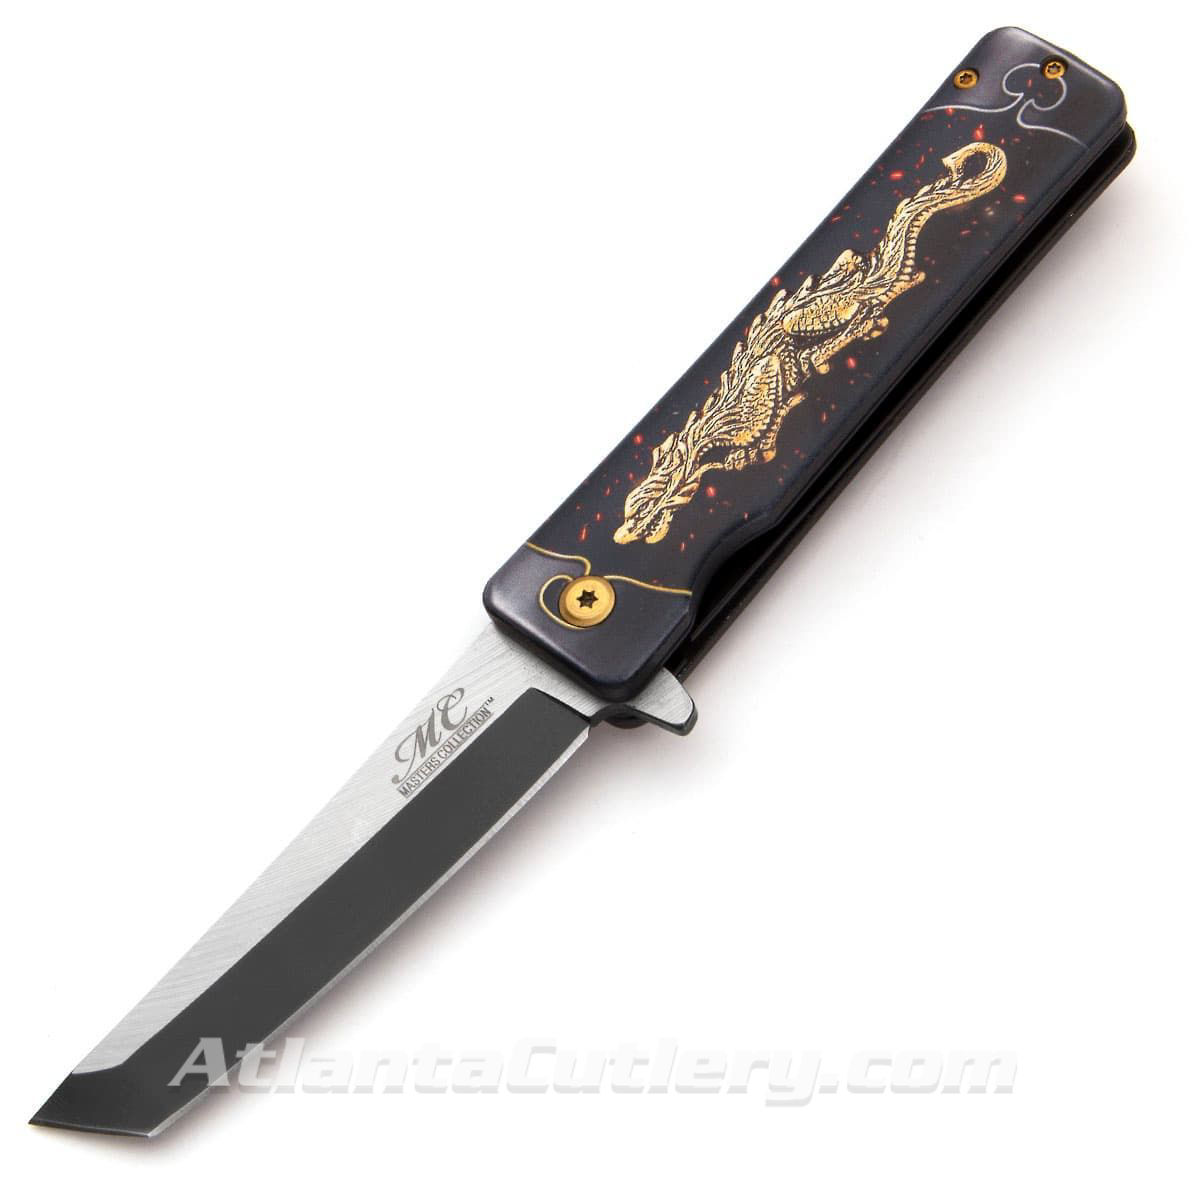 Dragon Tanto liner lock pocket knife has assisted opening, stainless steel blade, finger flipper, and removable pocket clip